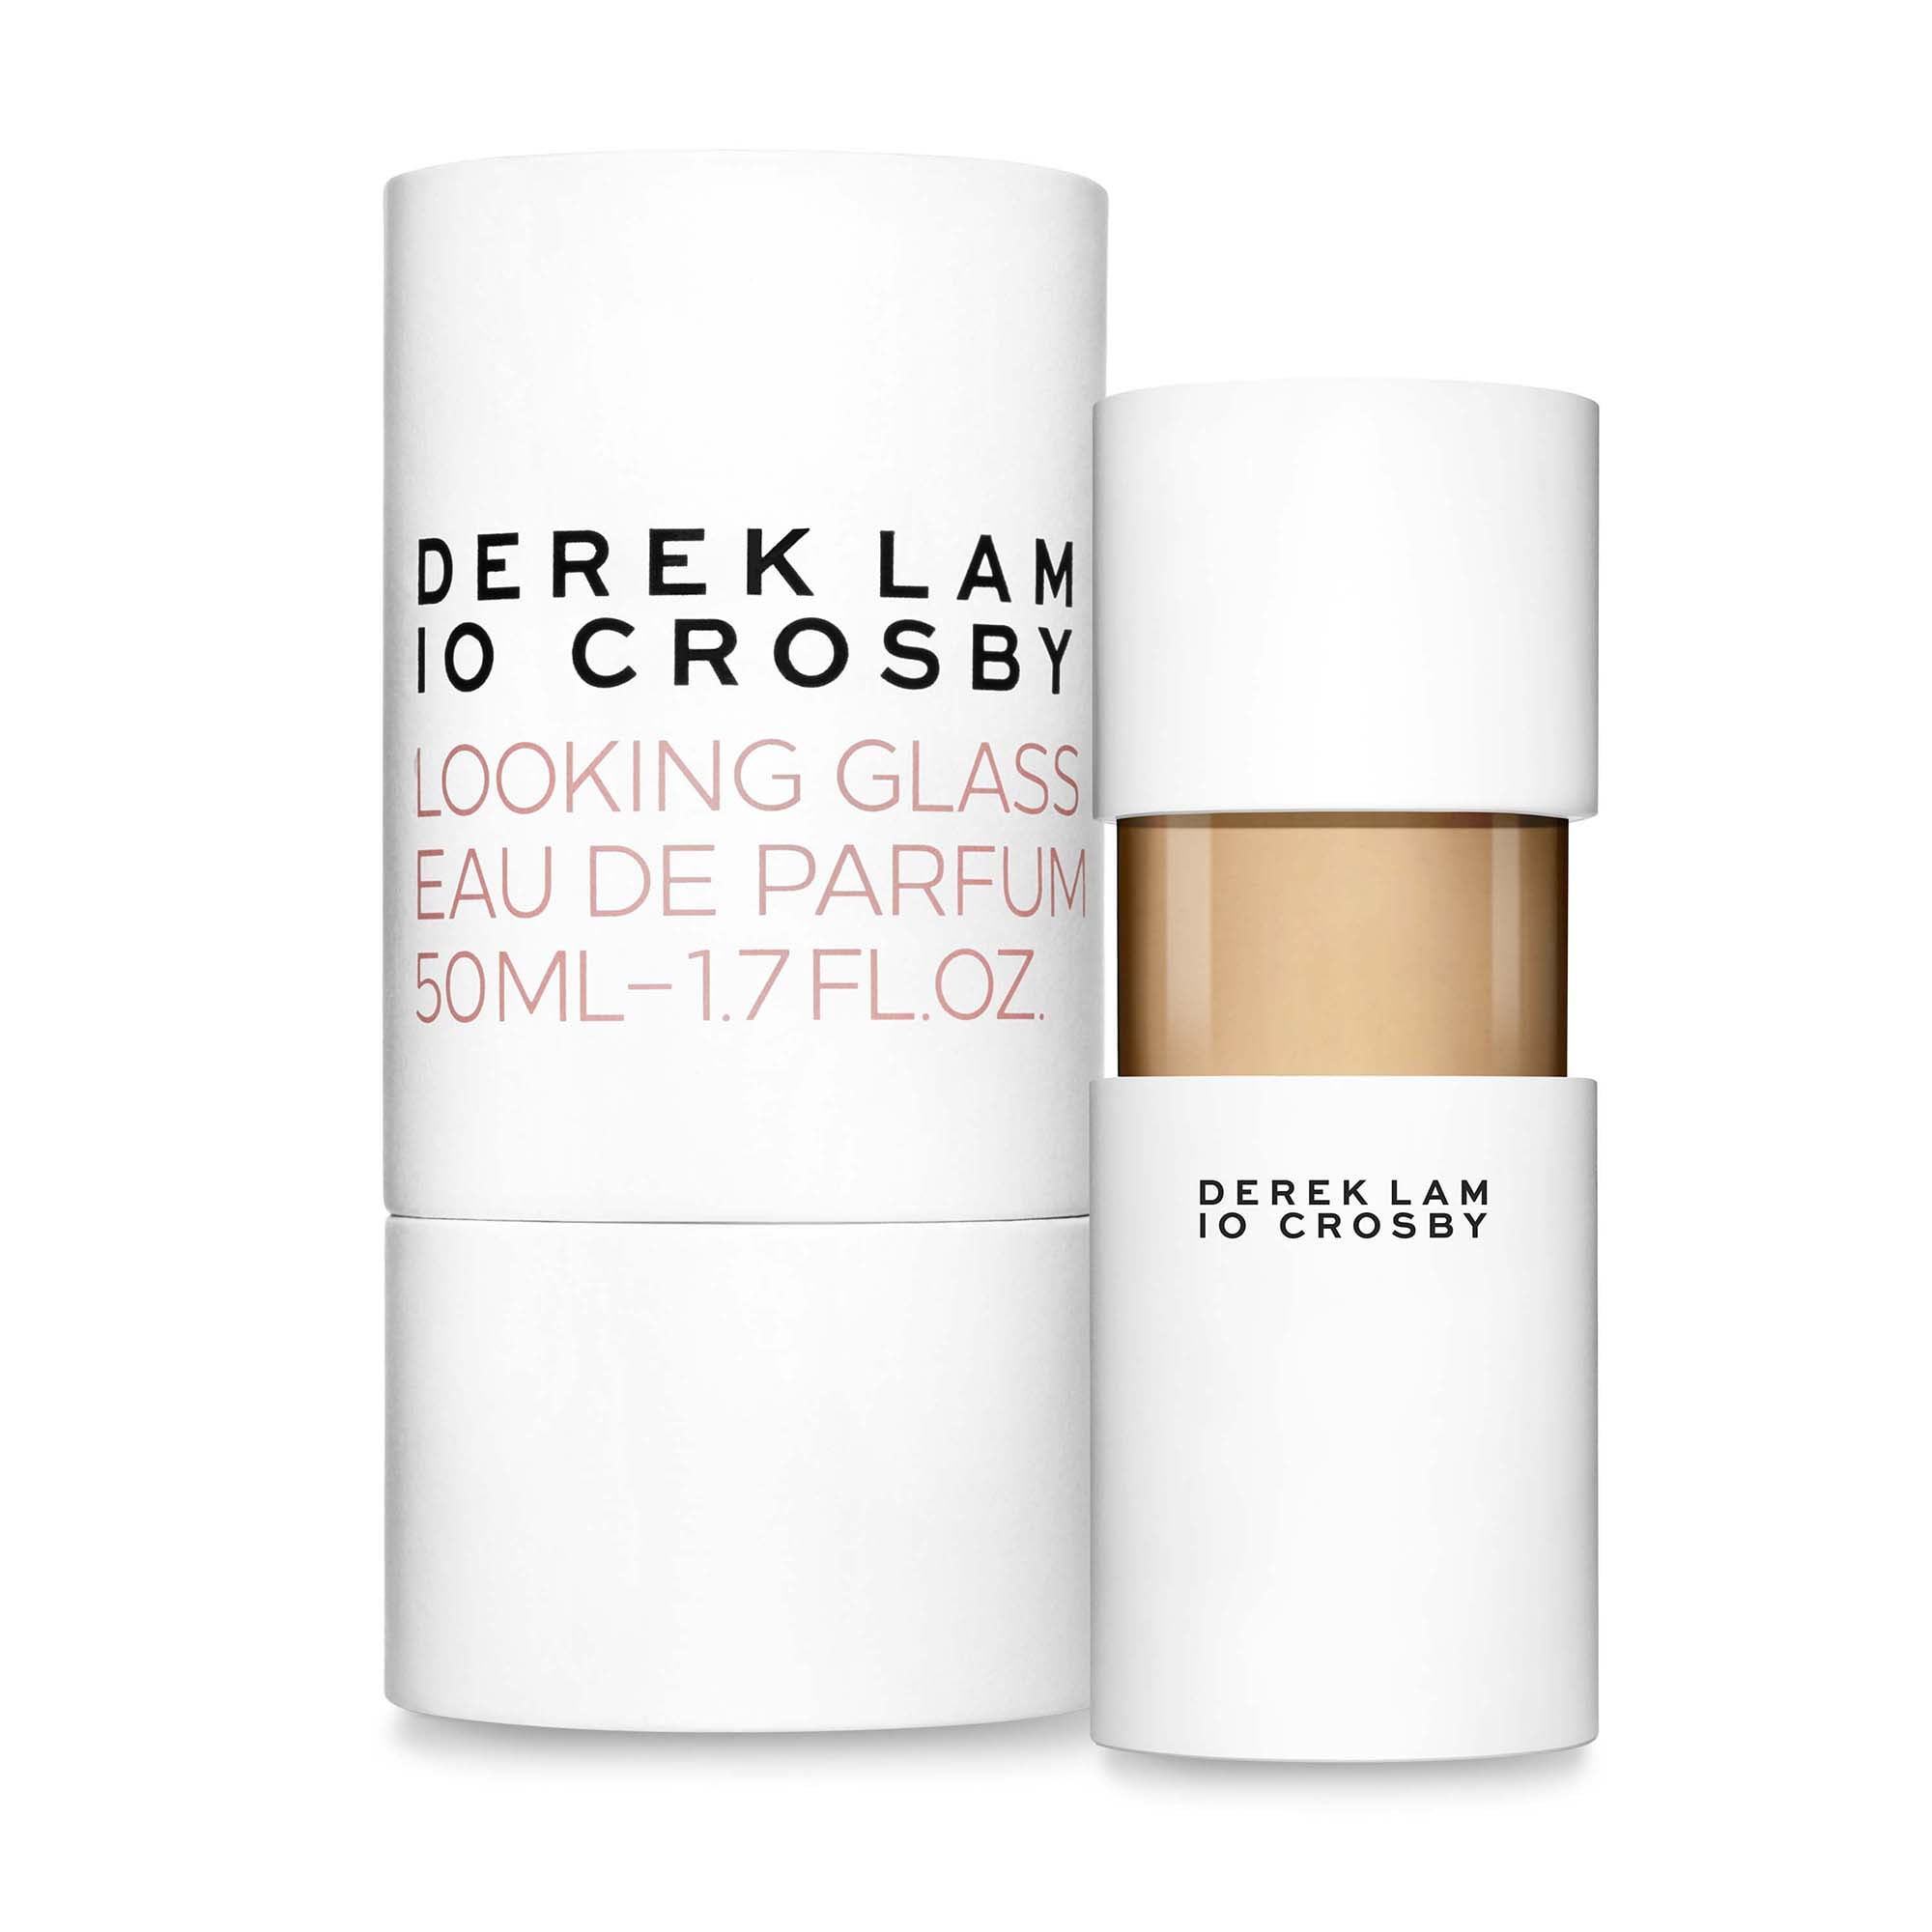 Derek Lam on 10 Crosby Fragrances and New York Moments on Film